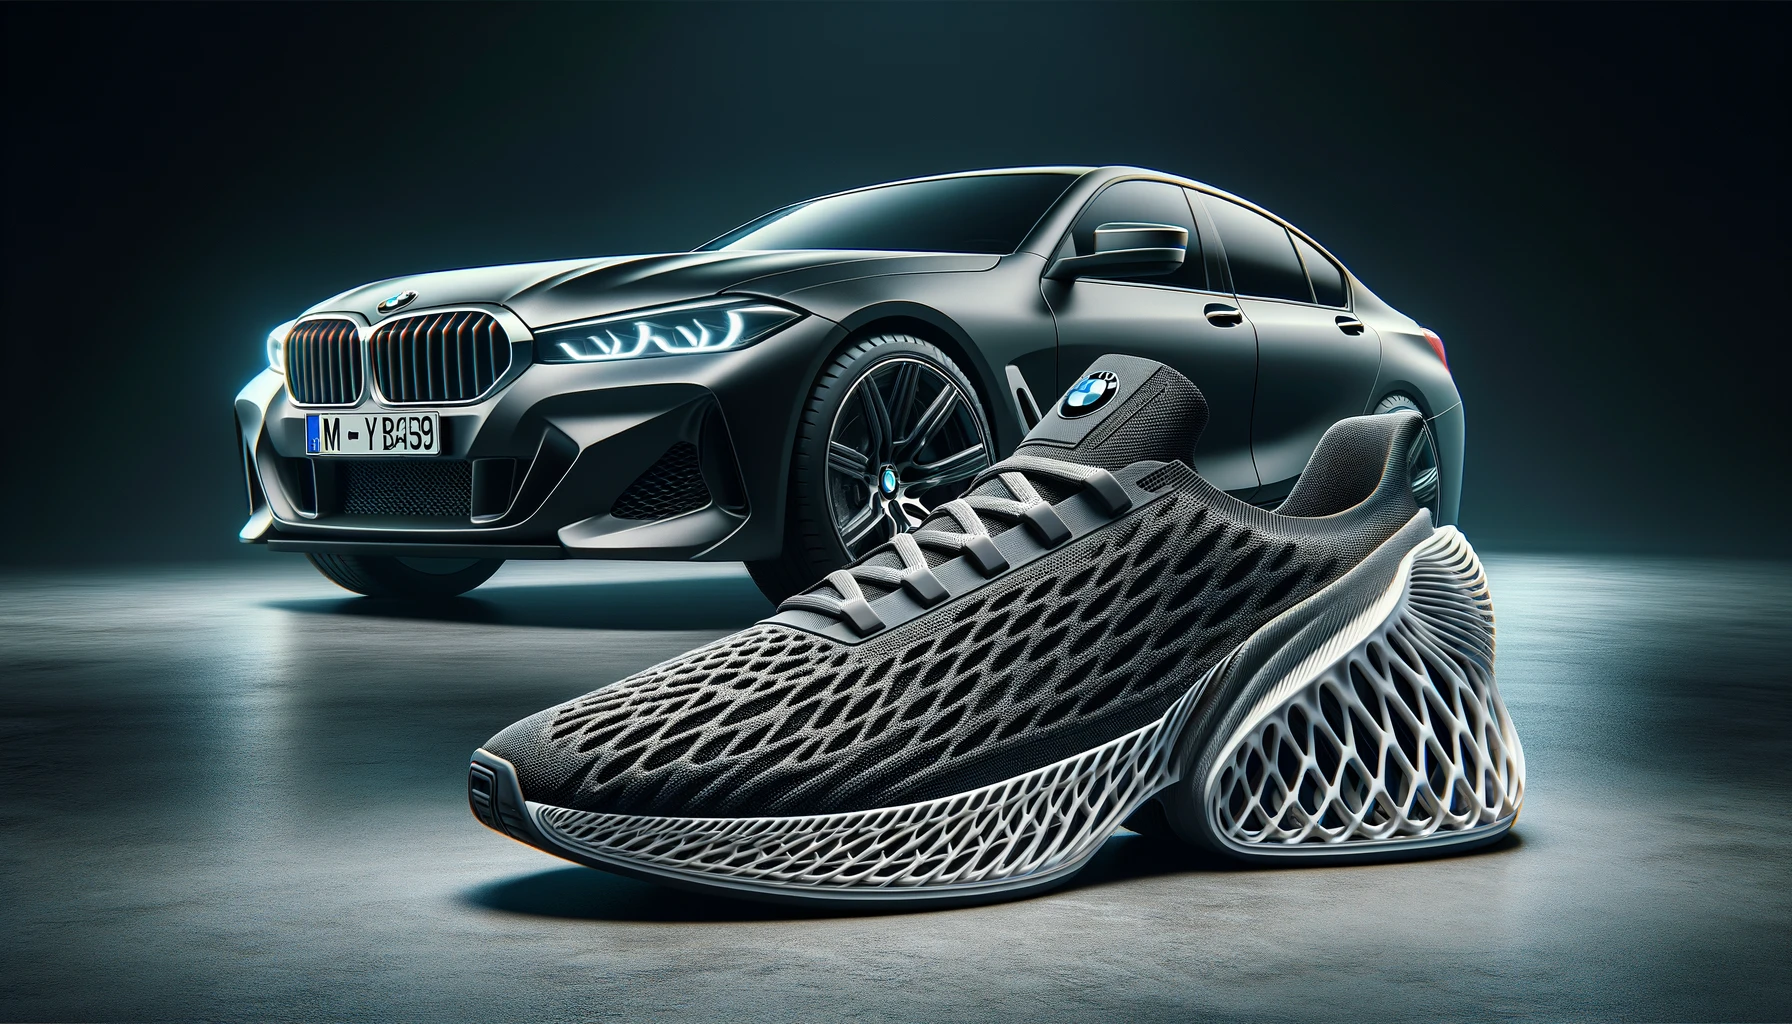 BMW dives into sports shoes with high-tech appeal